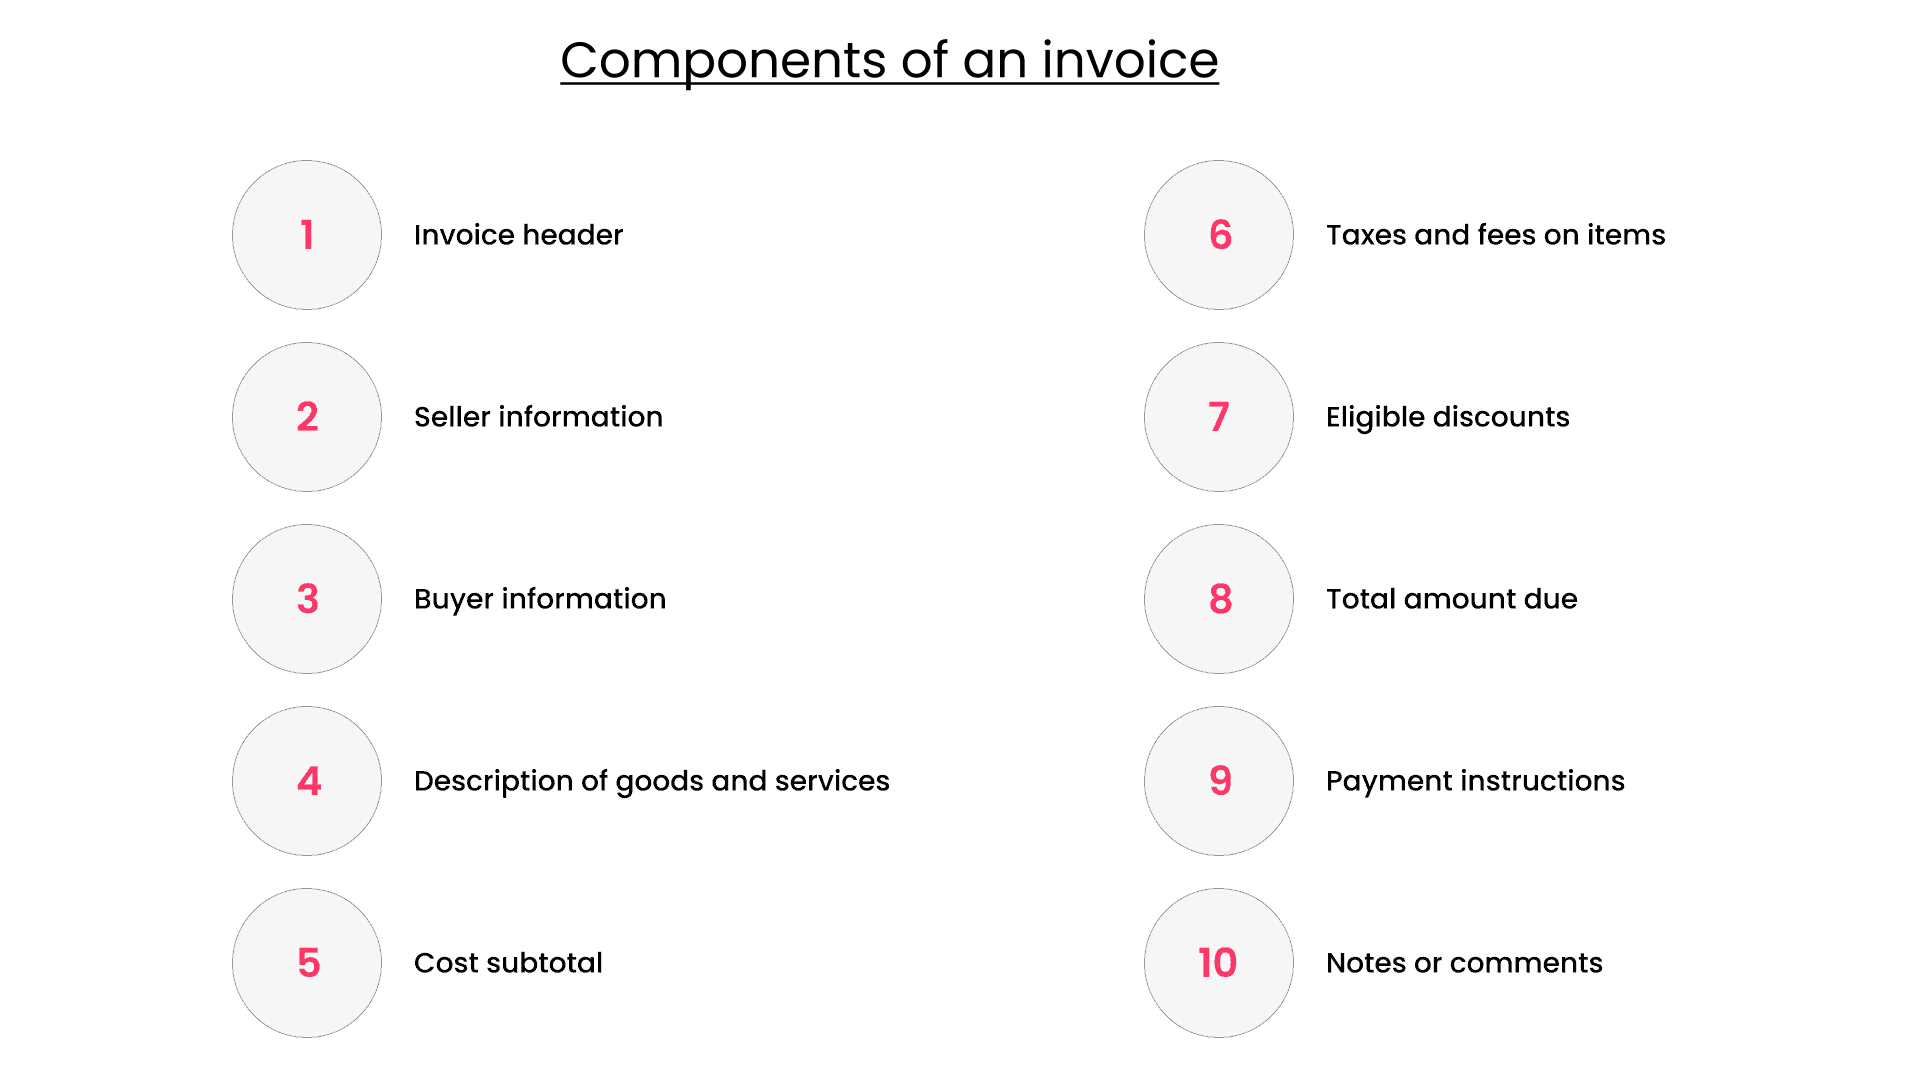 Components of an invoice